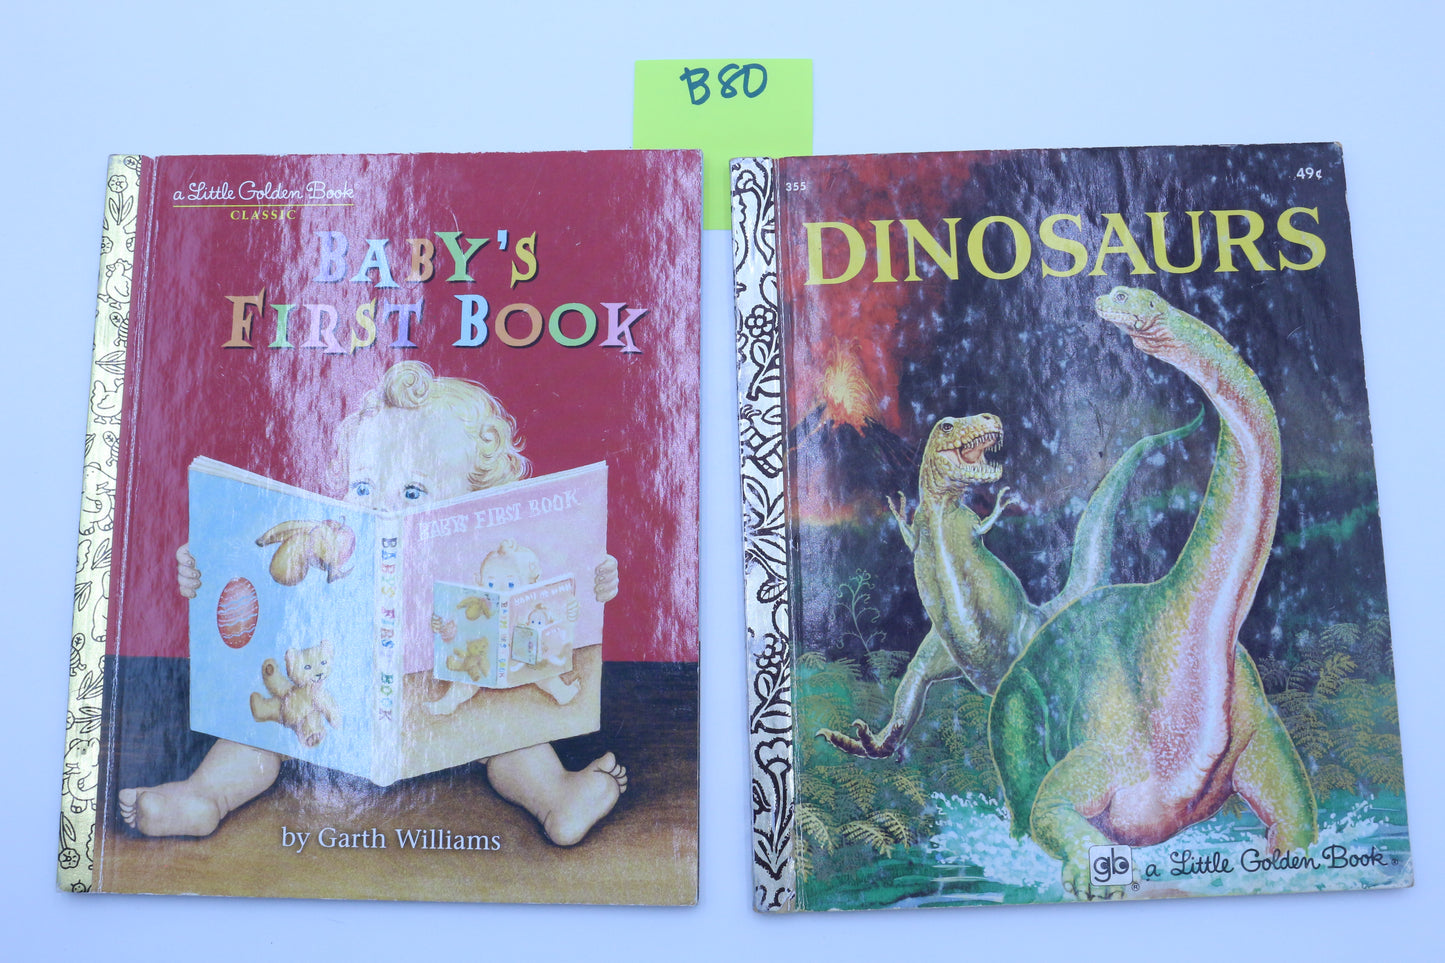 Little Golden Books Baby's First Book or Dinosaurs